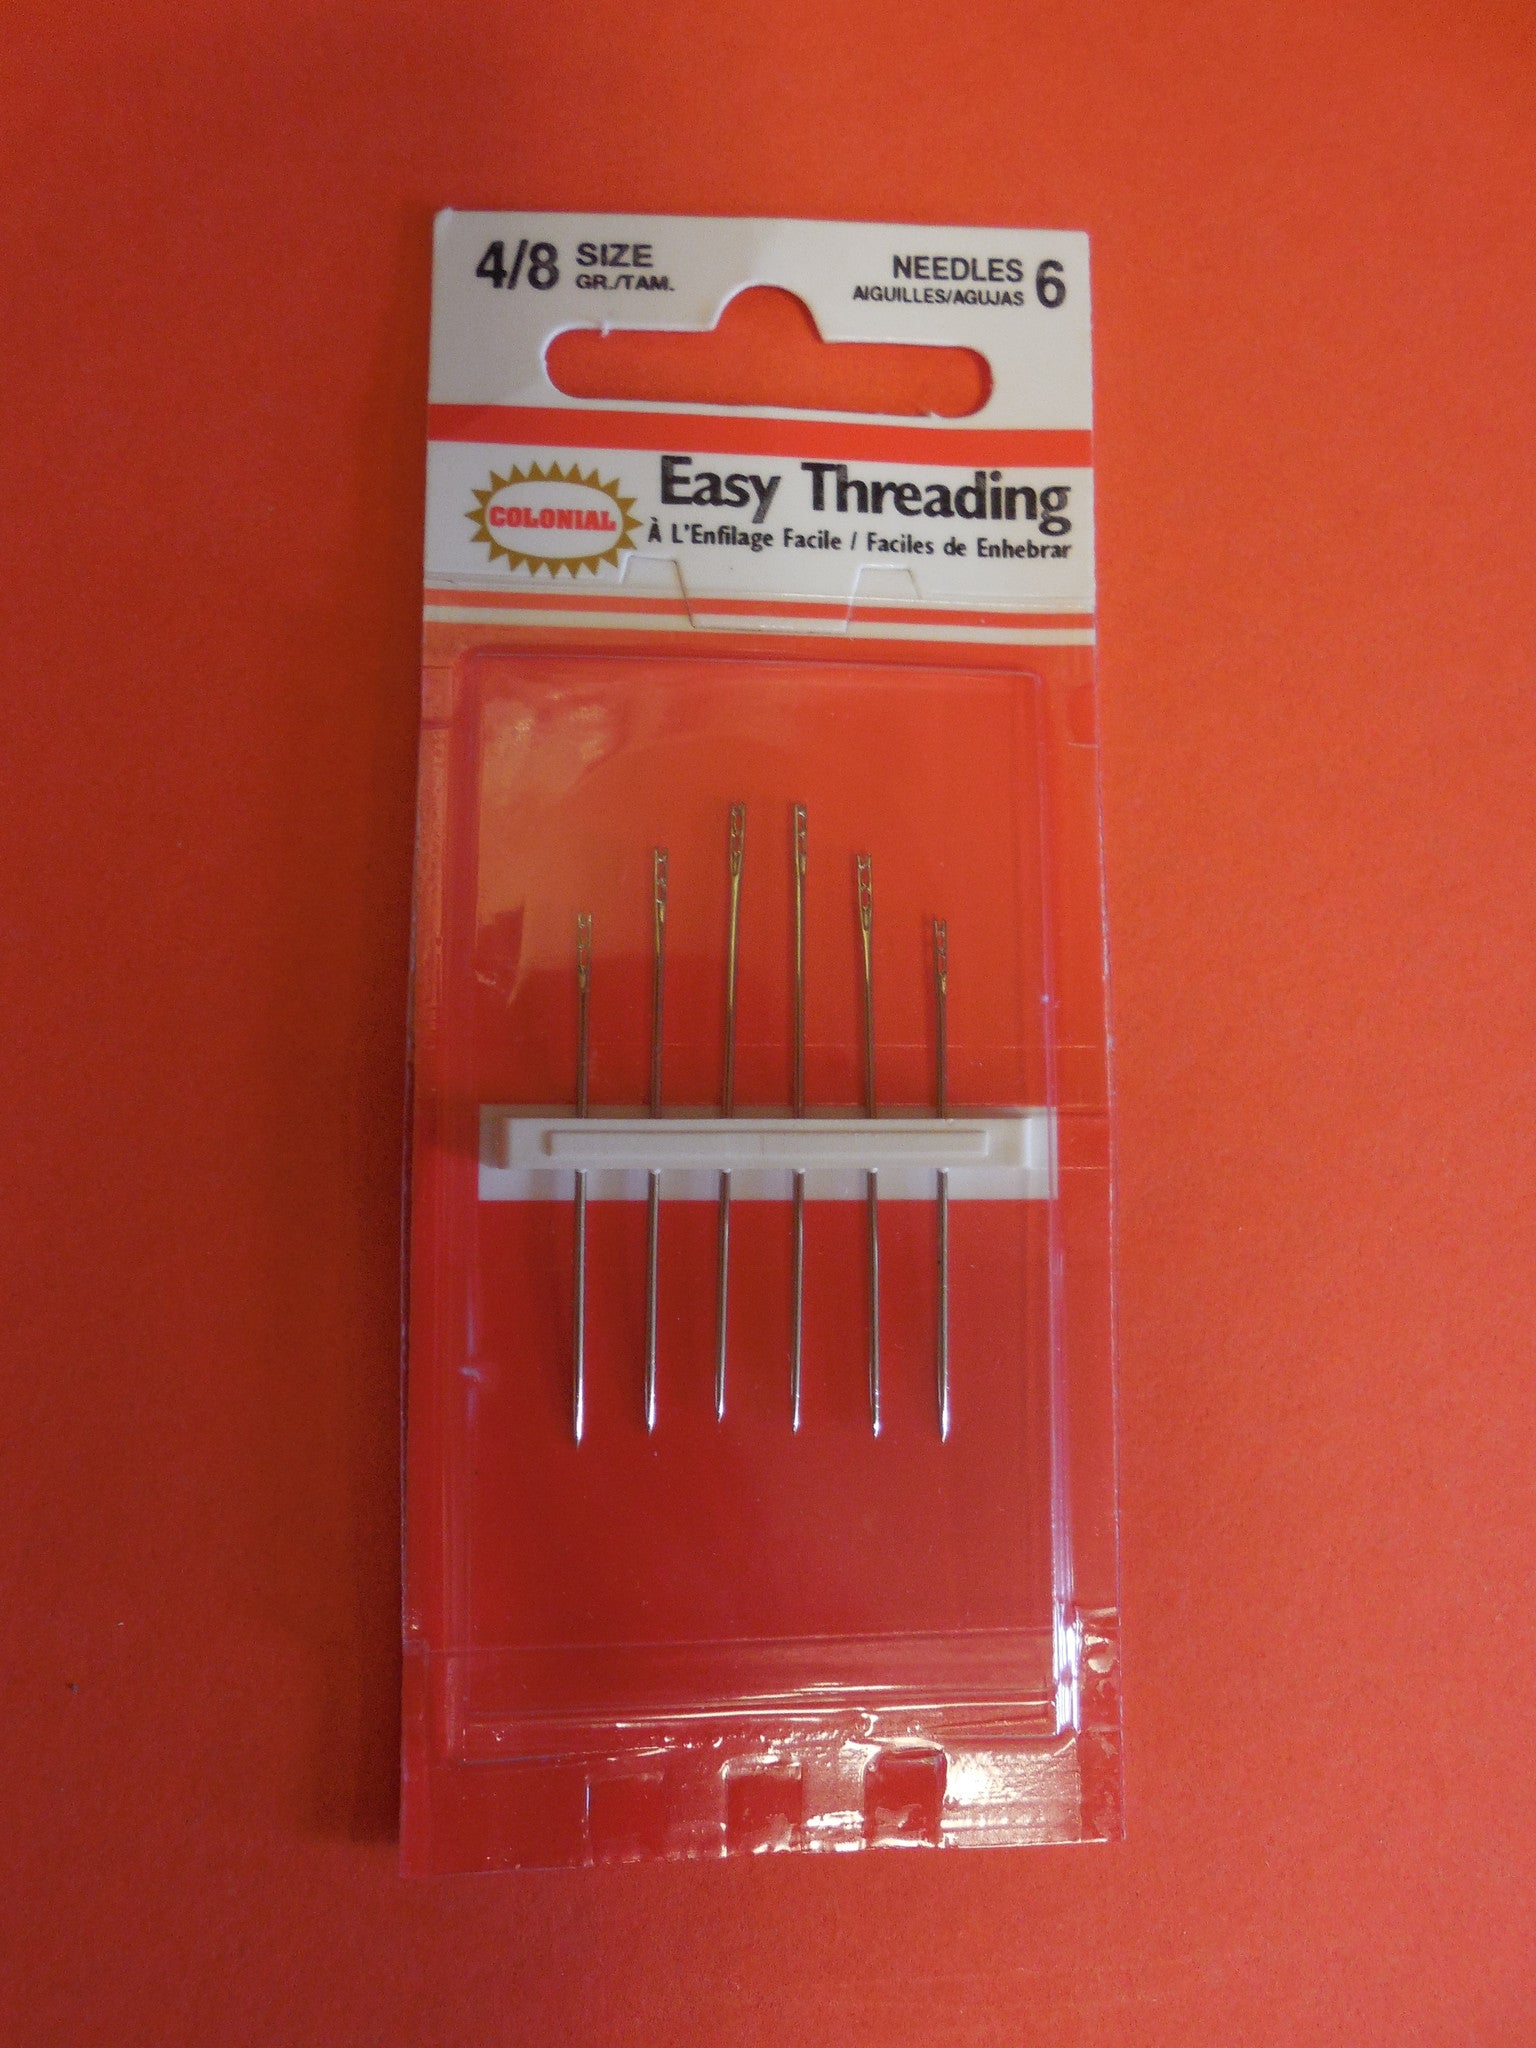 A 6 pack of easy threading needles